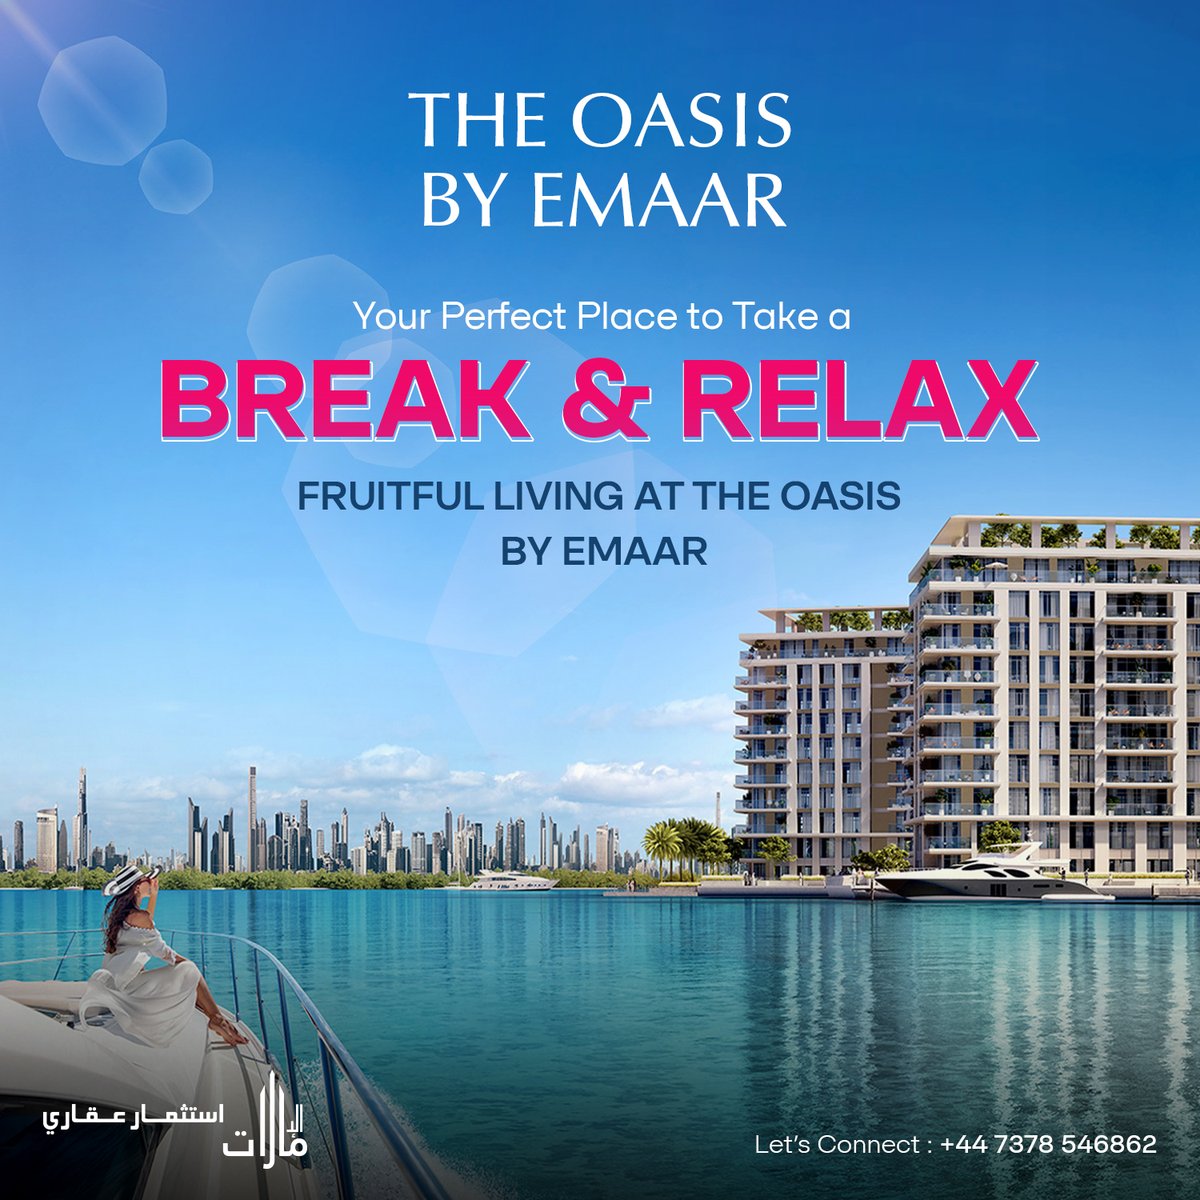 The Oasis is your perfect place to take a break and relax.

Coming Soon!

Contact:
+44 7378 546862

#Emaar #Emaardubai #dubai #dxb #theoasis #Oasis #dubaiproperty #dubaiproperties #properties #luxuryproperty #Property